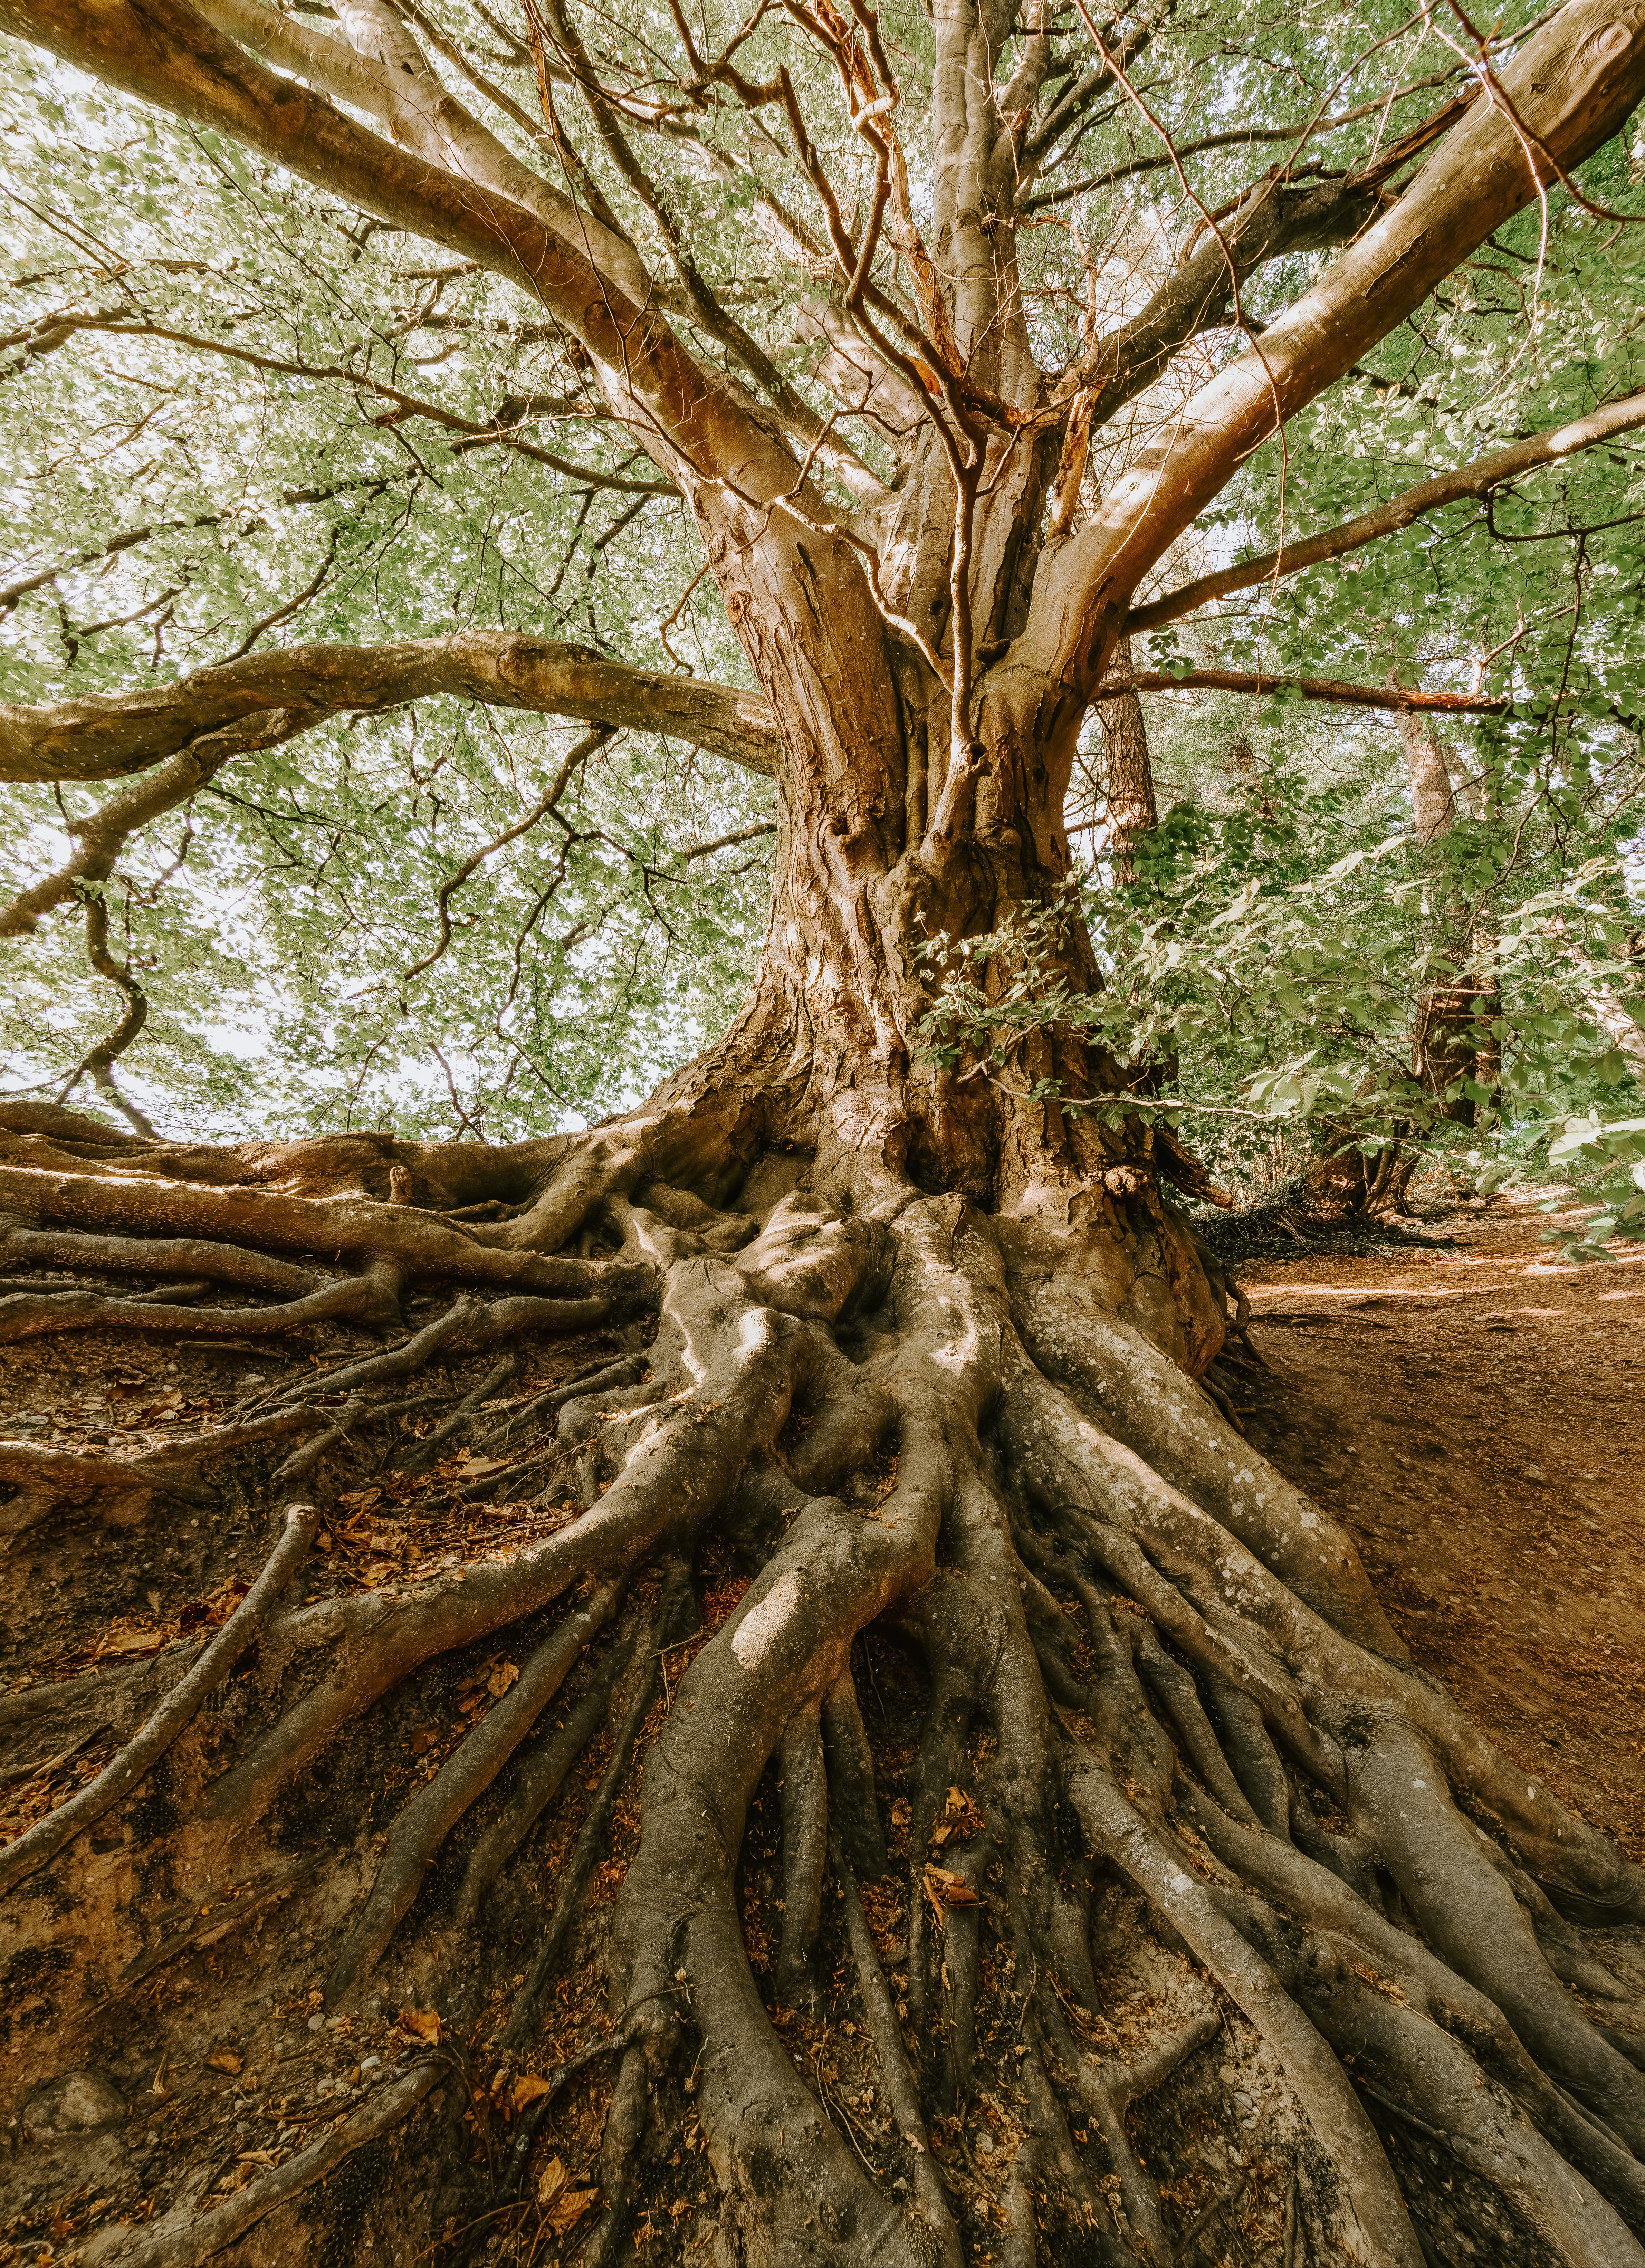 What Is the Oldest Tree in the World?